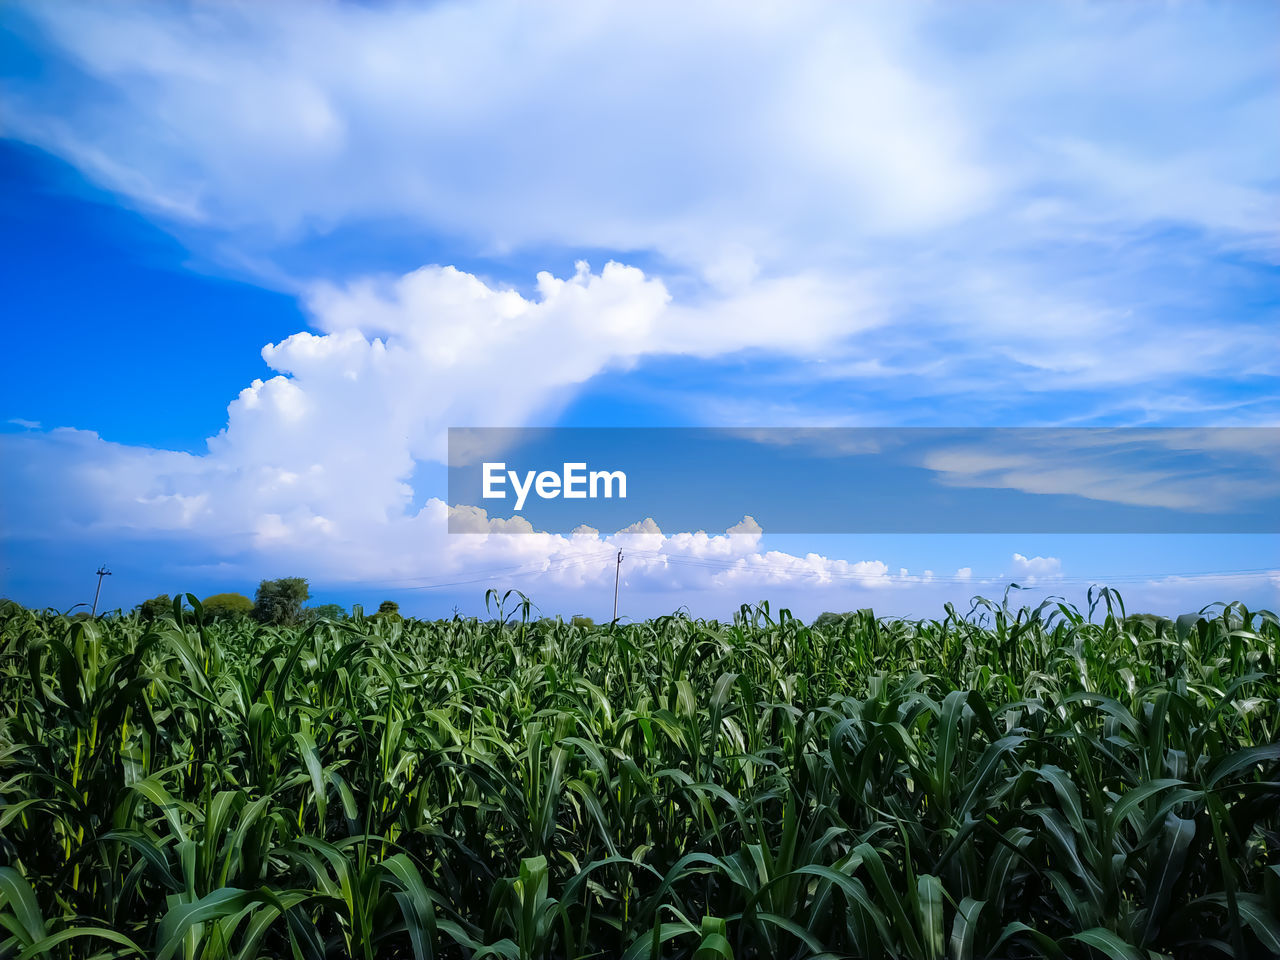 Field of millet plants under the sky with attractive clouds